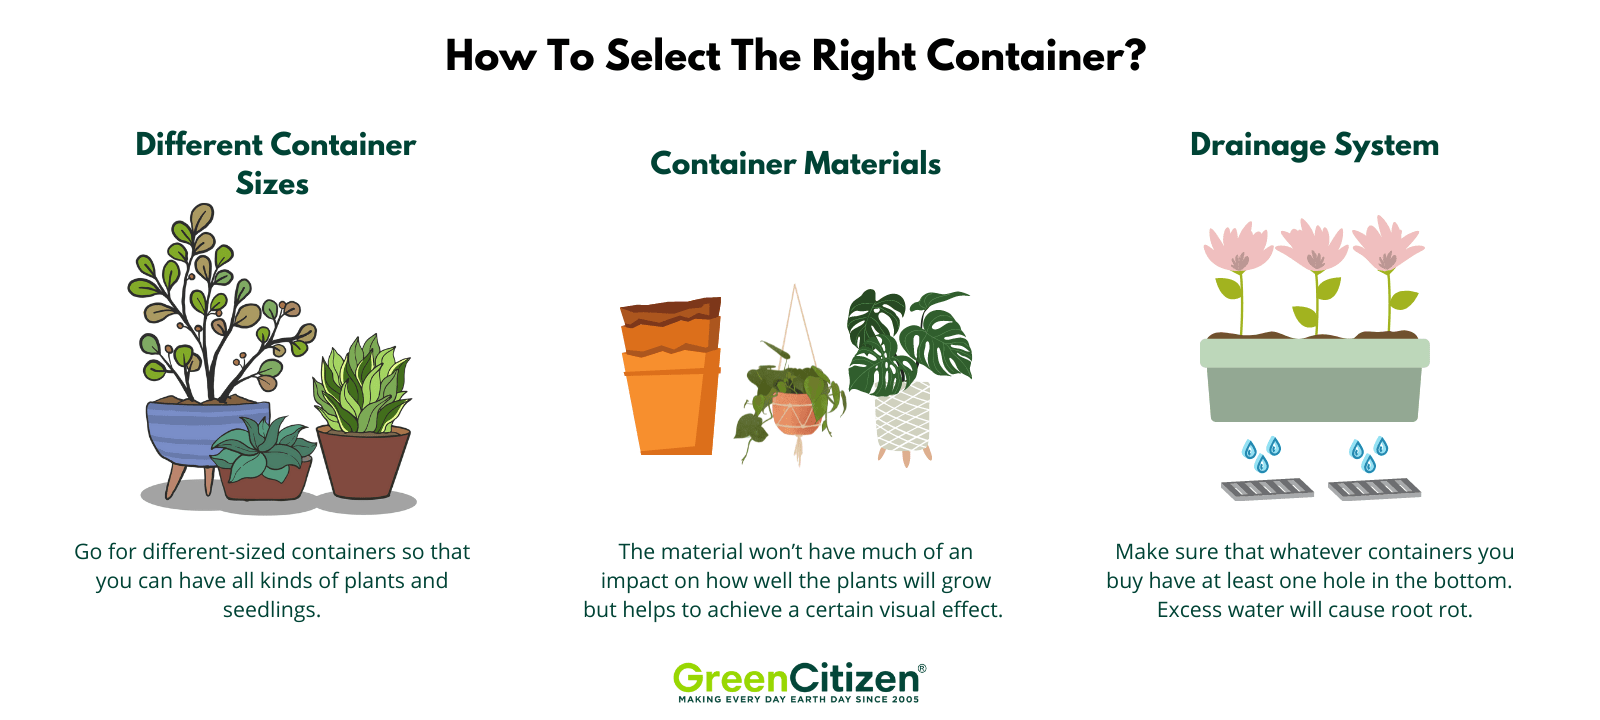 How To Select The Right Container